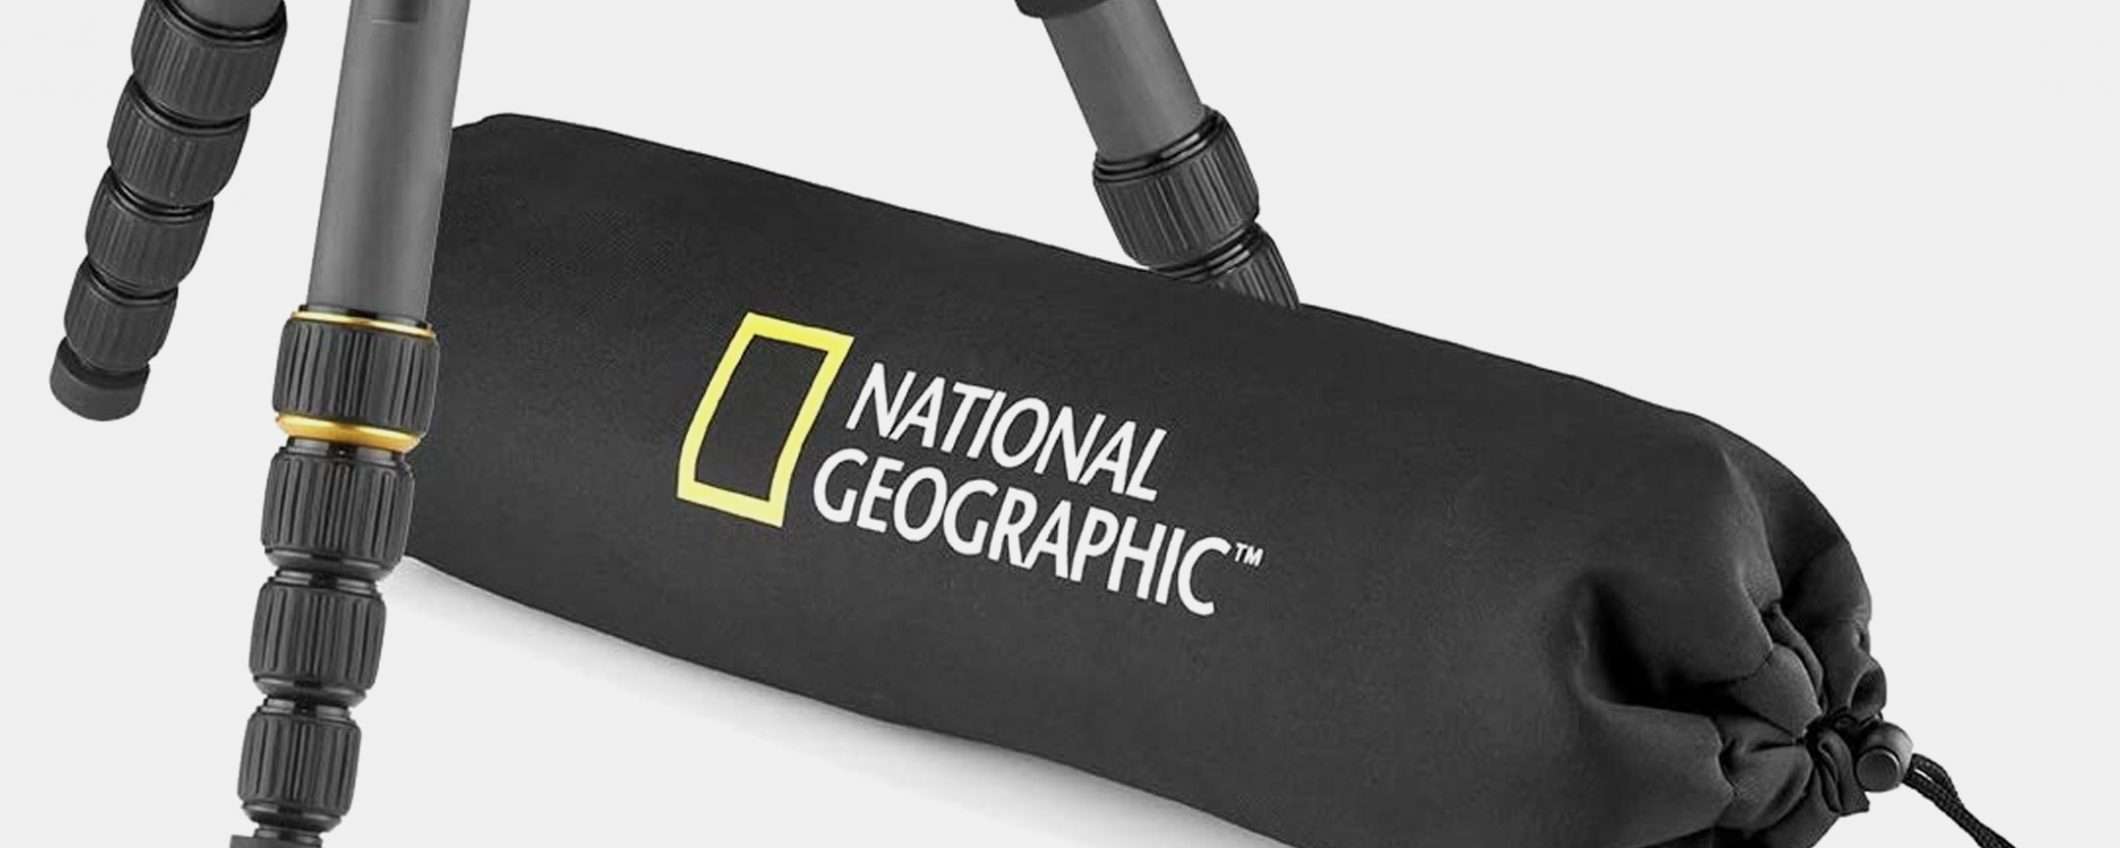 Treppiede National Geographic oggi in FORTE SCONTO